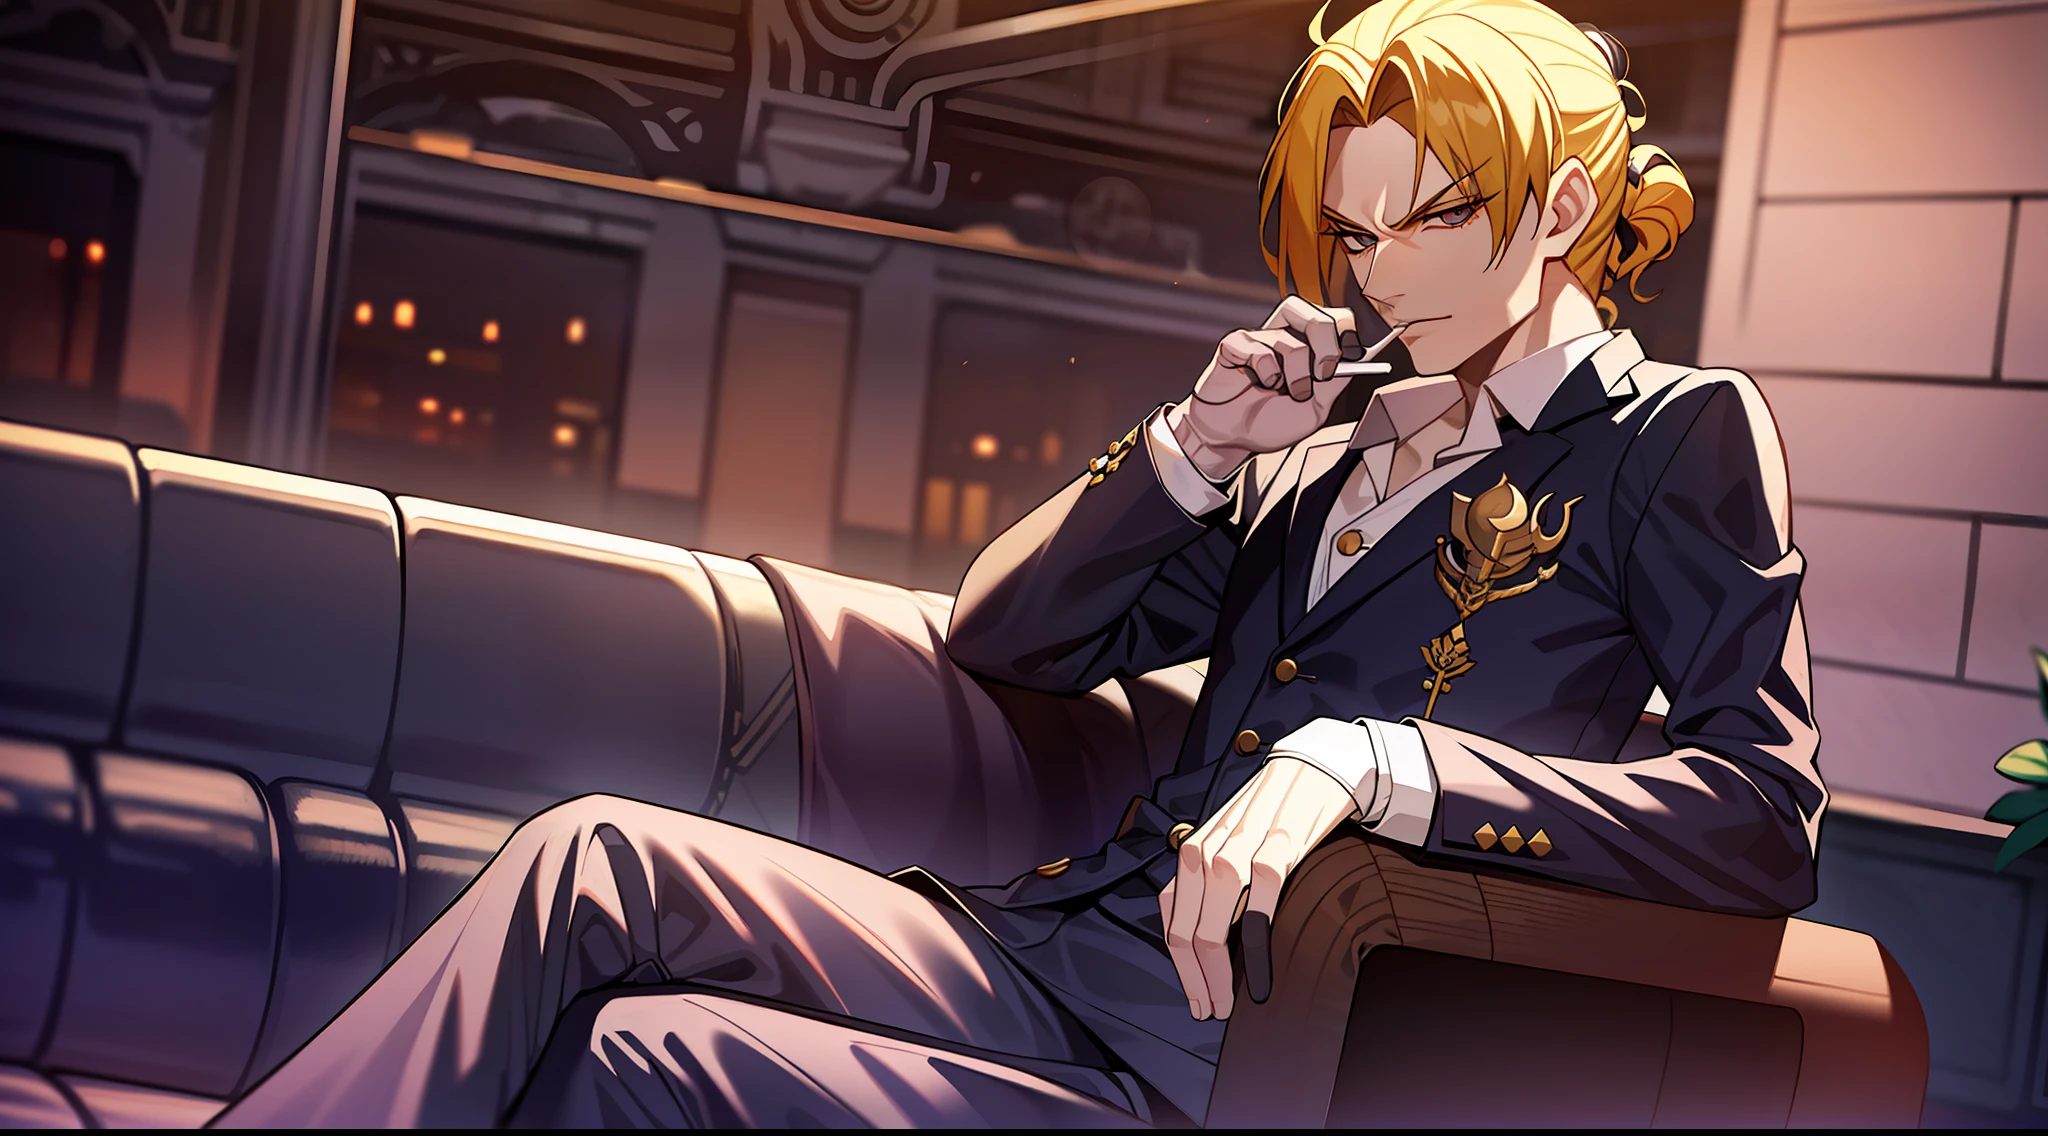 Dio, wearing an elegant suit with crossed legs and holding a lit cigarette between his fingers, with a black and white train station background in the background, in a relaxed and confident pose.